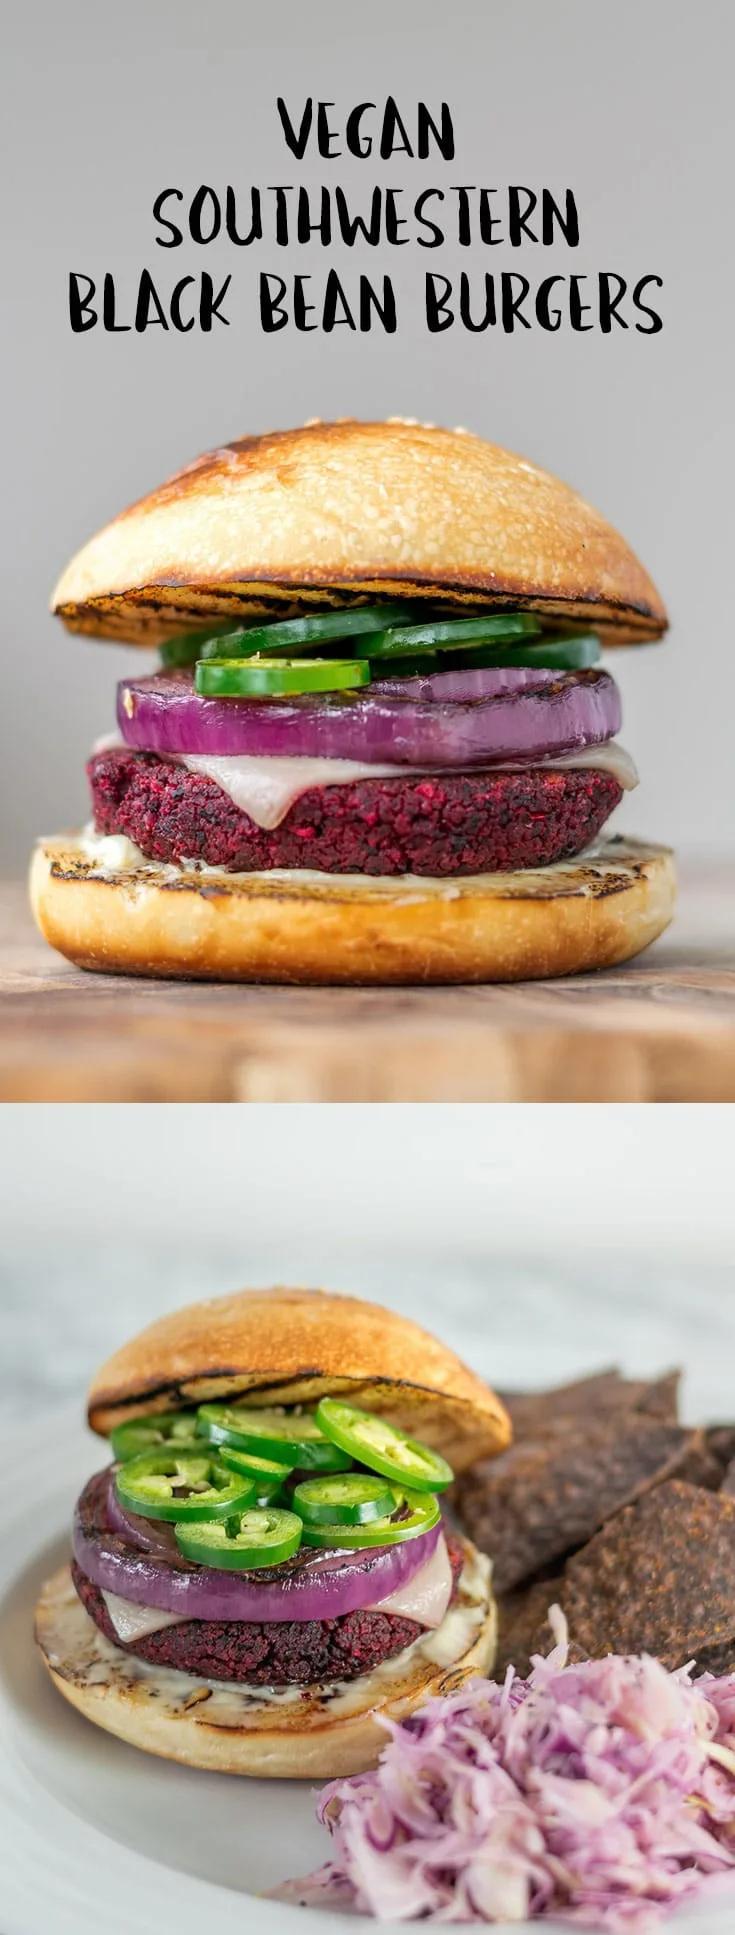 The flavor is amped up in these mouthwatering, spicy vegan southwestern black bean burgers. Super healthy and packed full of good for you ingredients. | thecuriouschickpea.com #vegan #veggieburgers